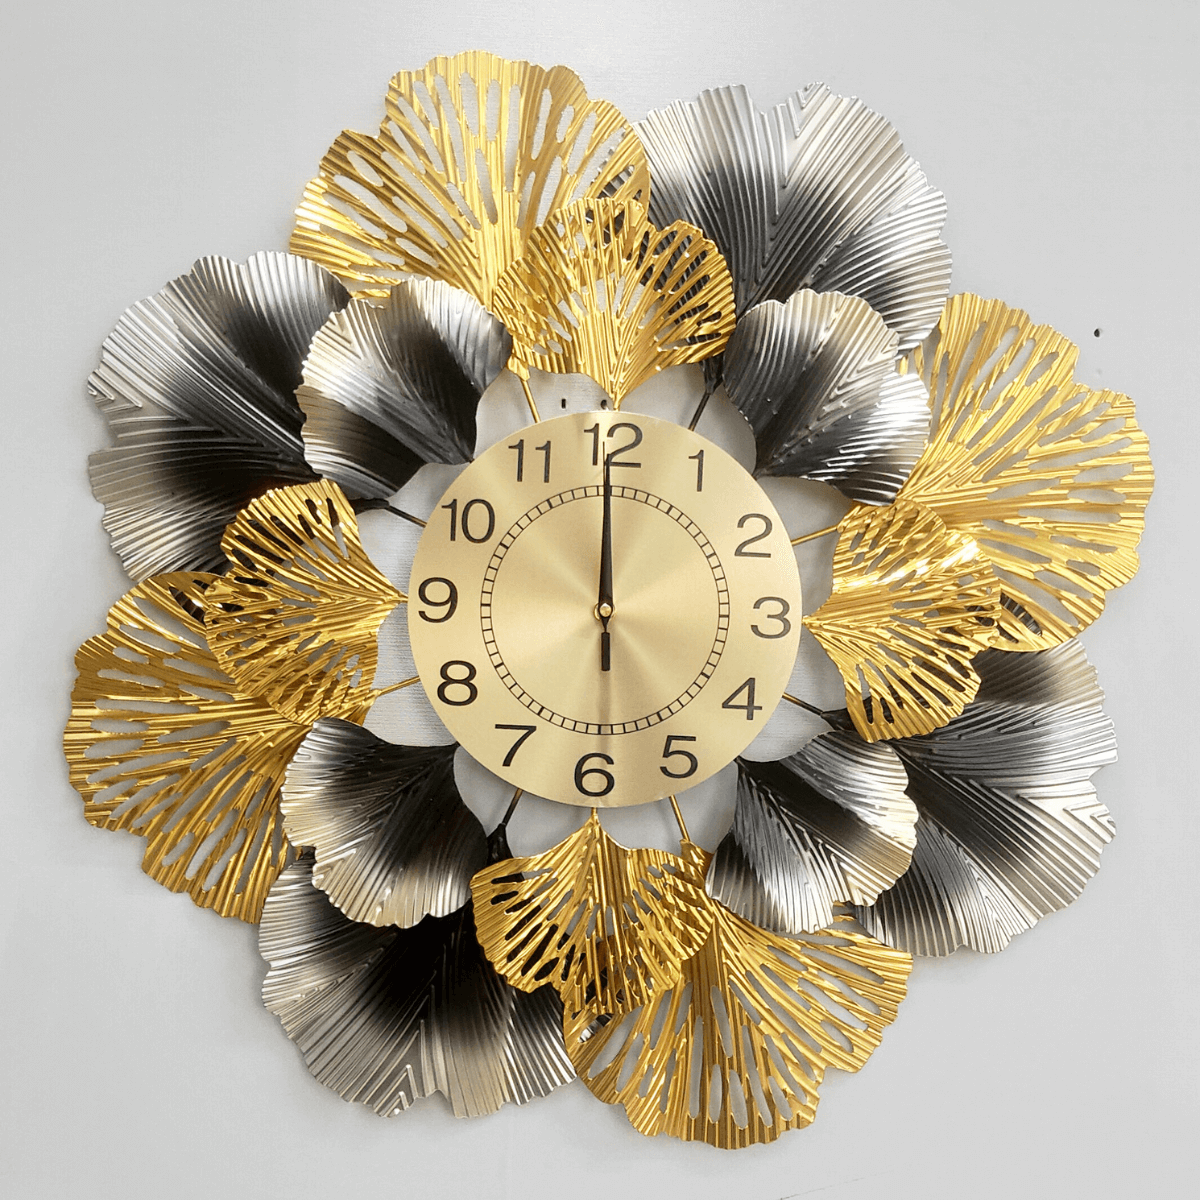 Black-and-Gold-Wall-Clock-in-Australia-1